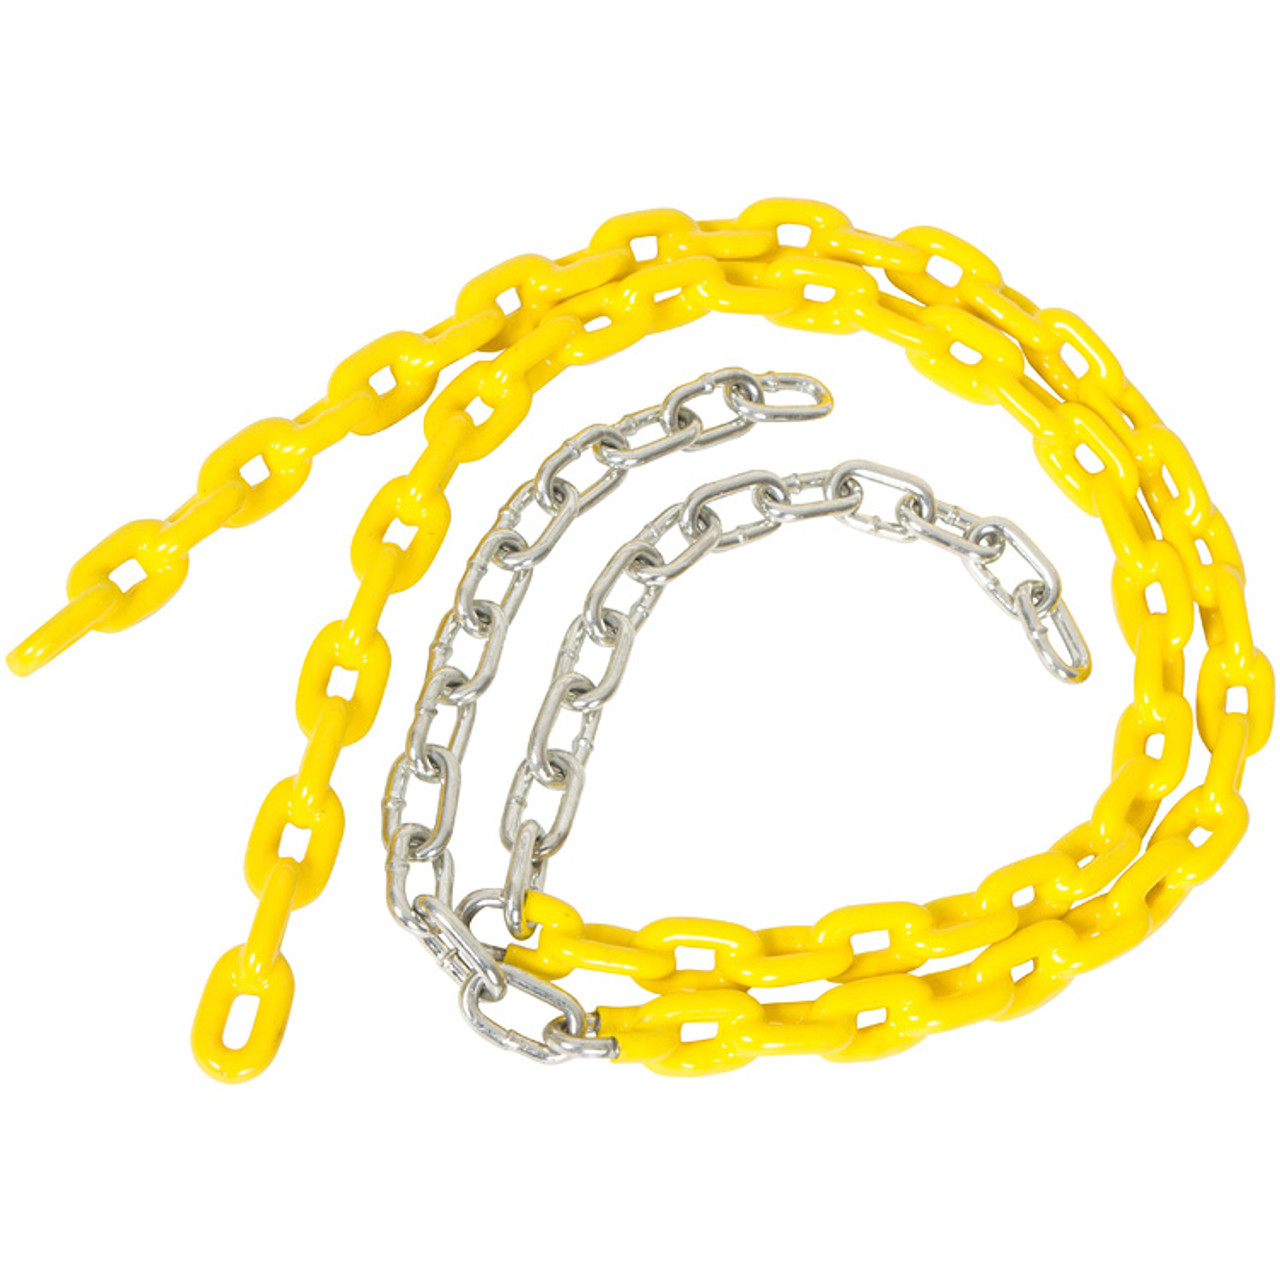 Coated Swing Chain for Swing Set